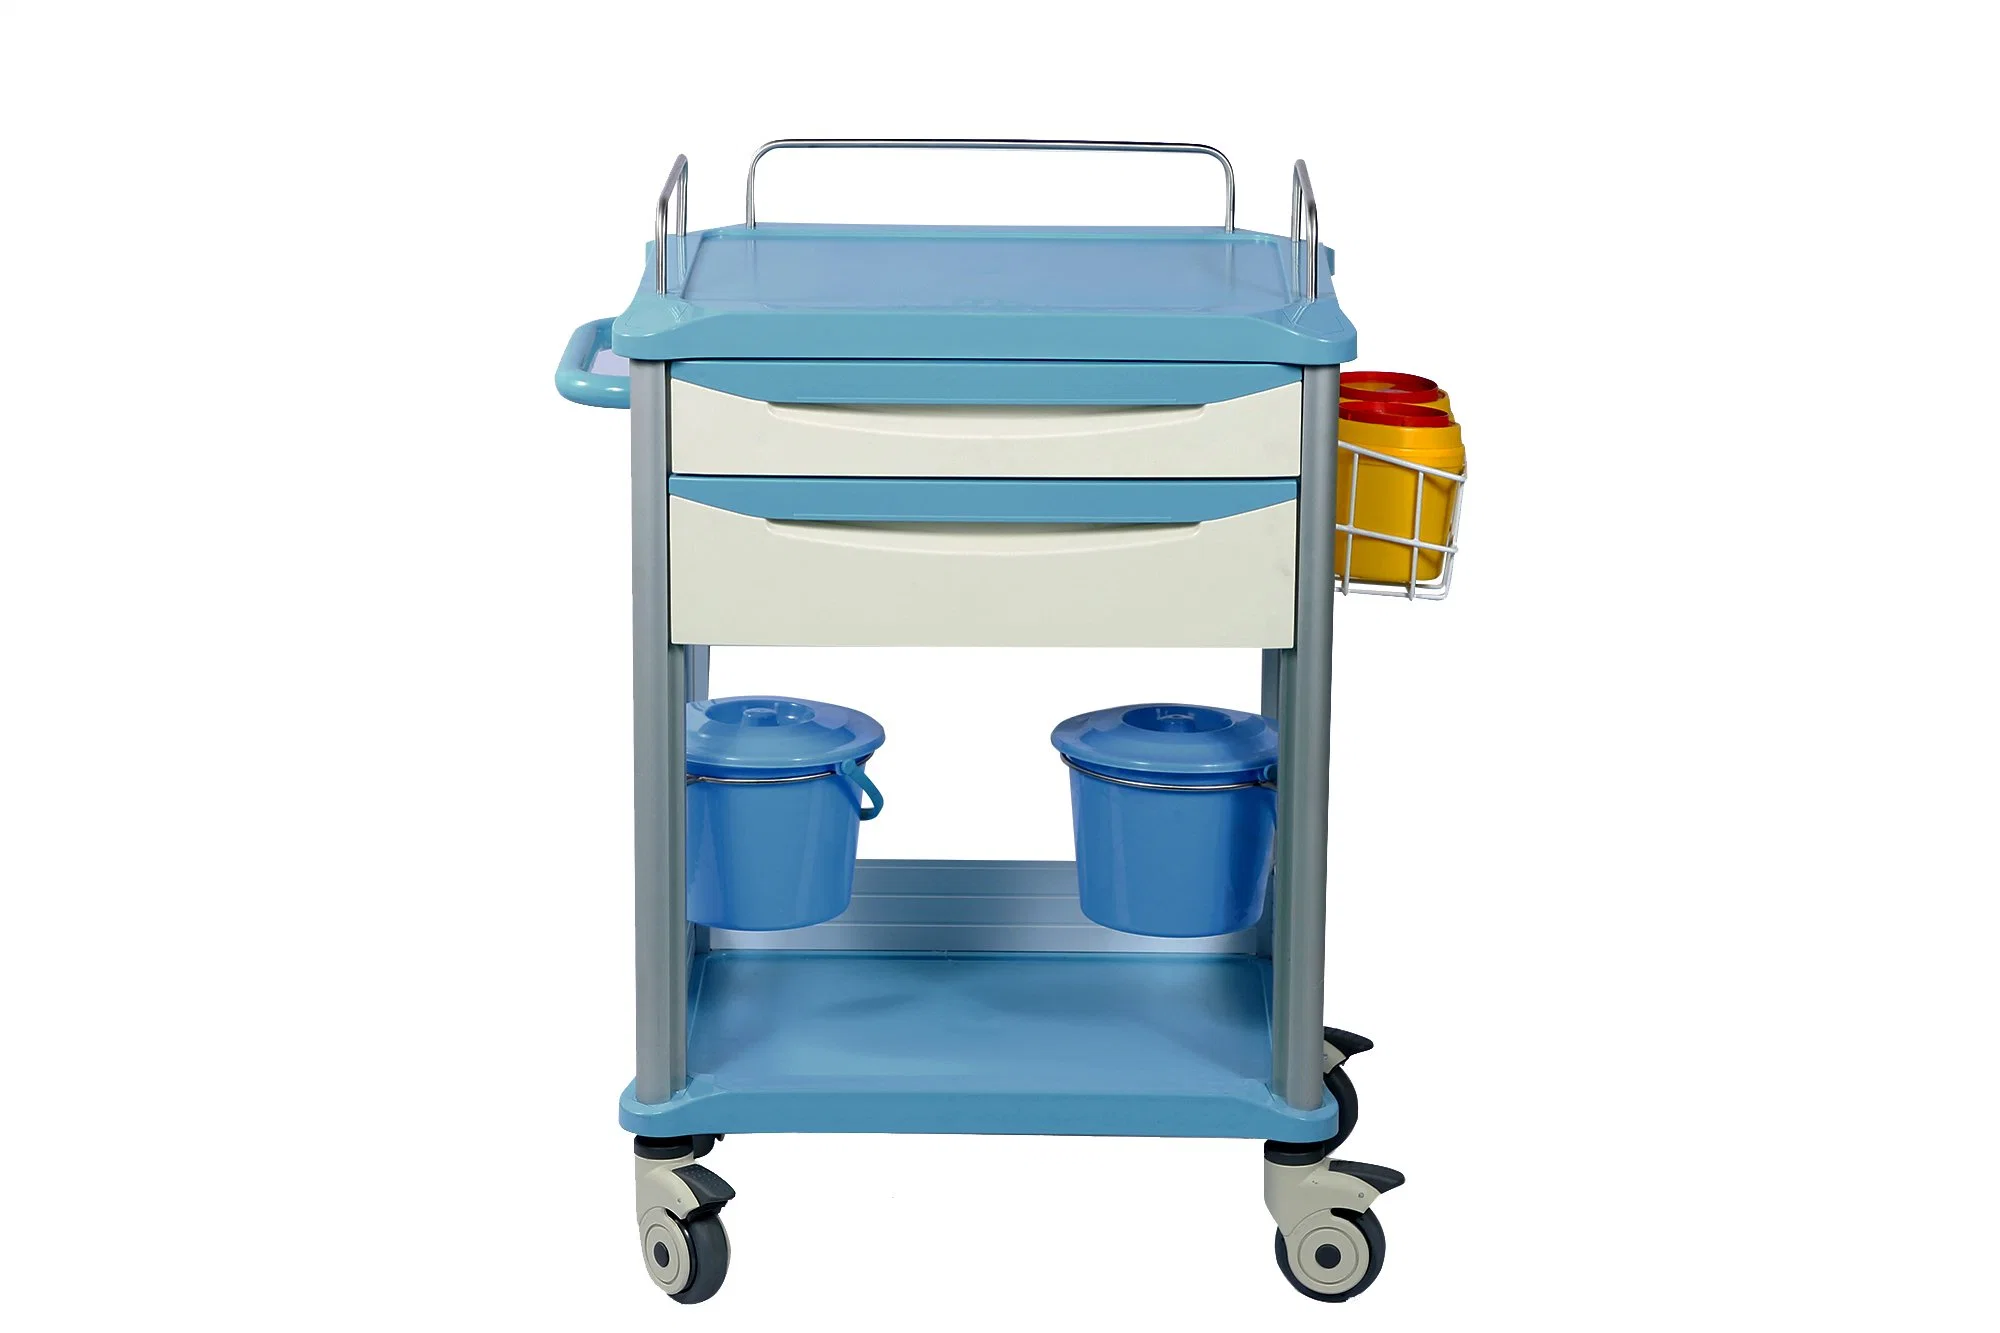 ABS Linen Trolley and Cart with Drawers for Medical, Emergency, Logistic, Laundry, Treatment, Medicine Distribution, Anesthesia as Hospital Equipment- E